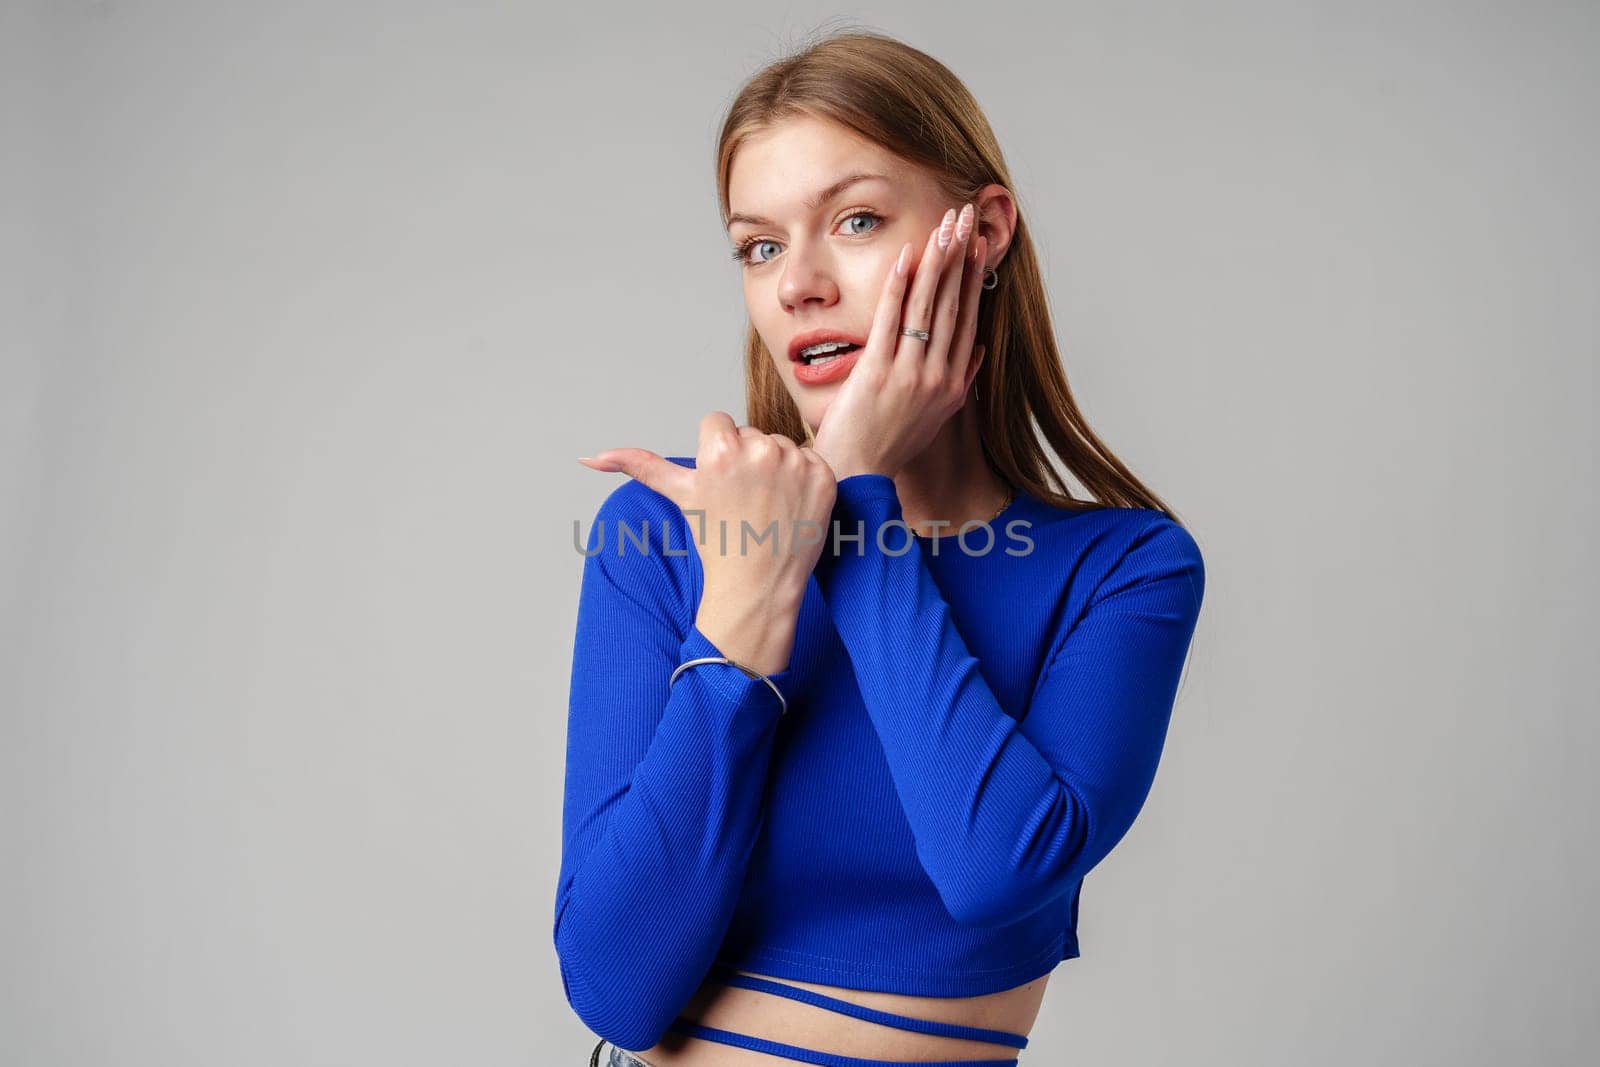 Woman in Blue Top Pointing With Hand Against Neutral Background by Fabrikasimf